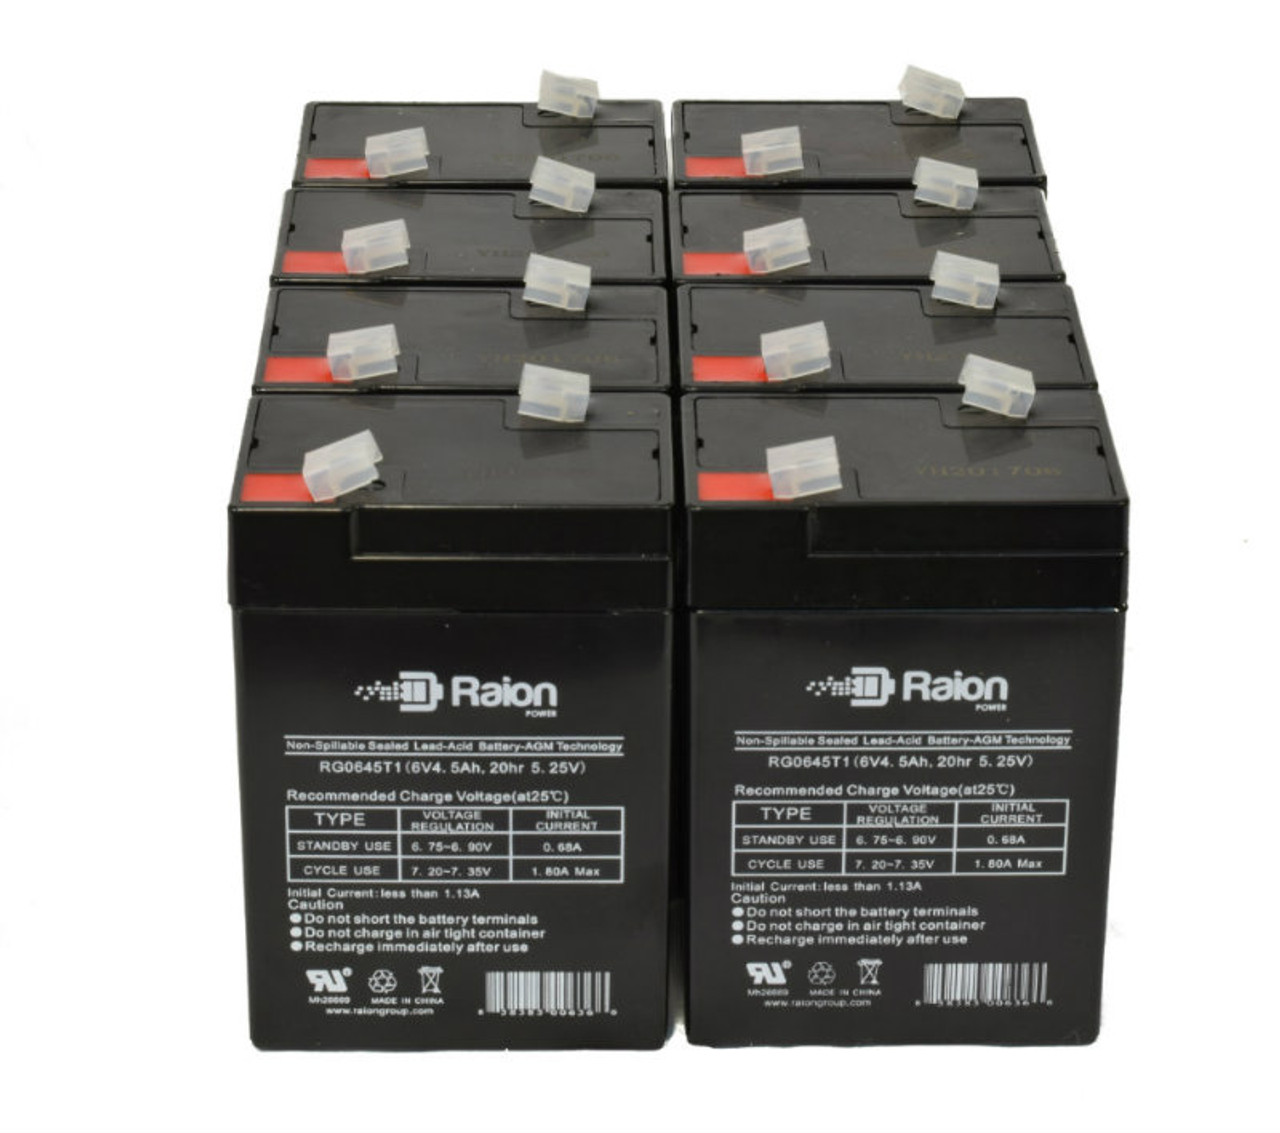 Raion Power 6 Volt 4.5Ah RG0645T1 Replacement Battery for Edwards 1799-0108 - 8 Pack